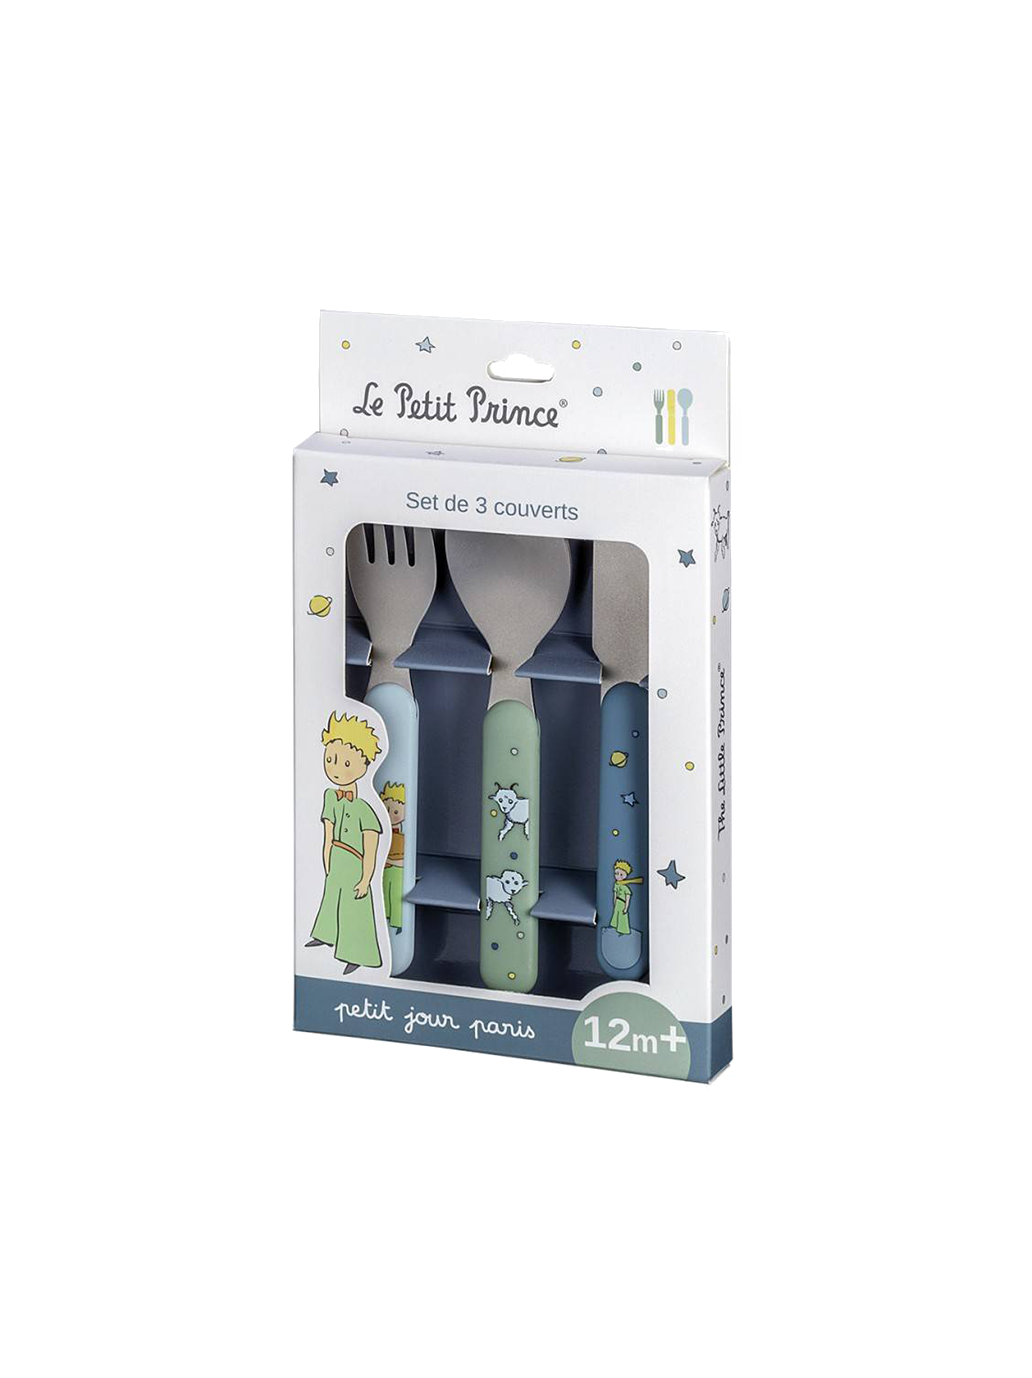 Cutlery set for kids